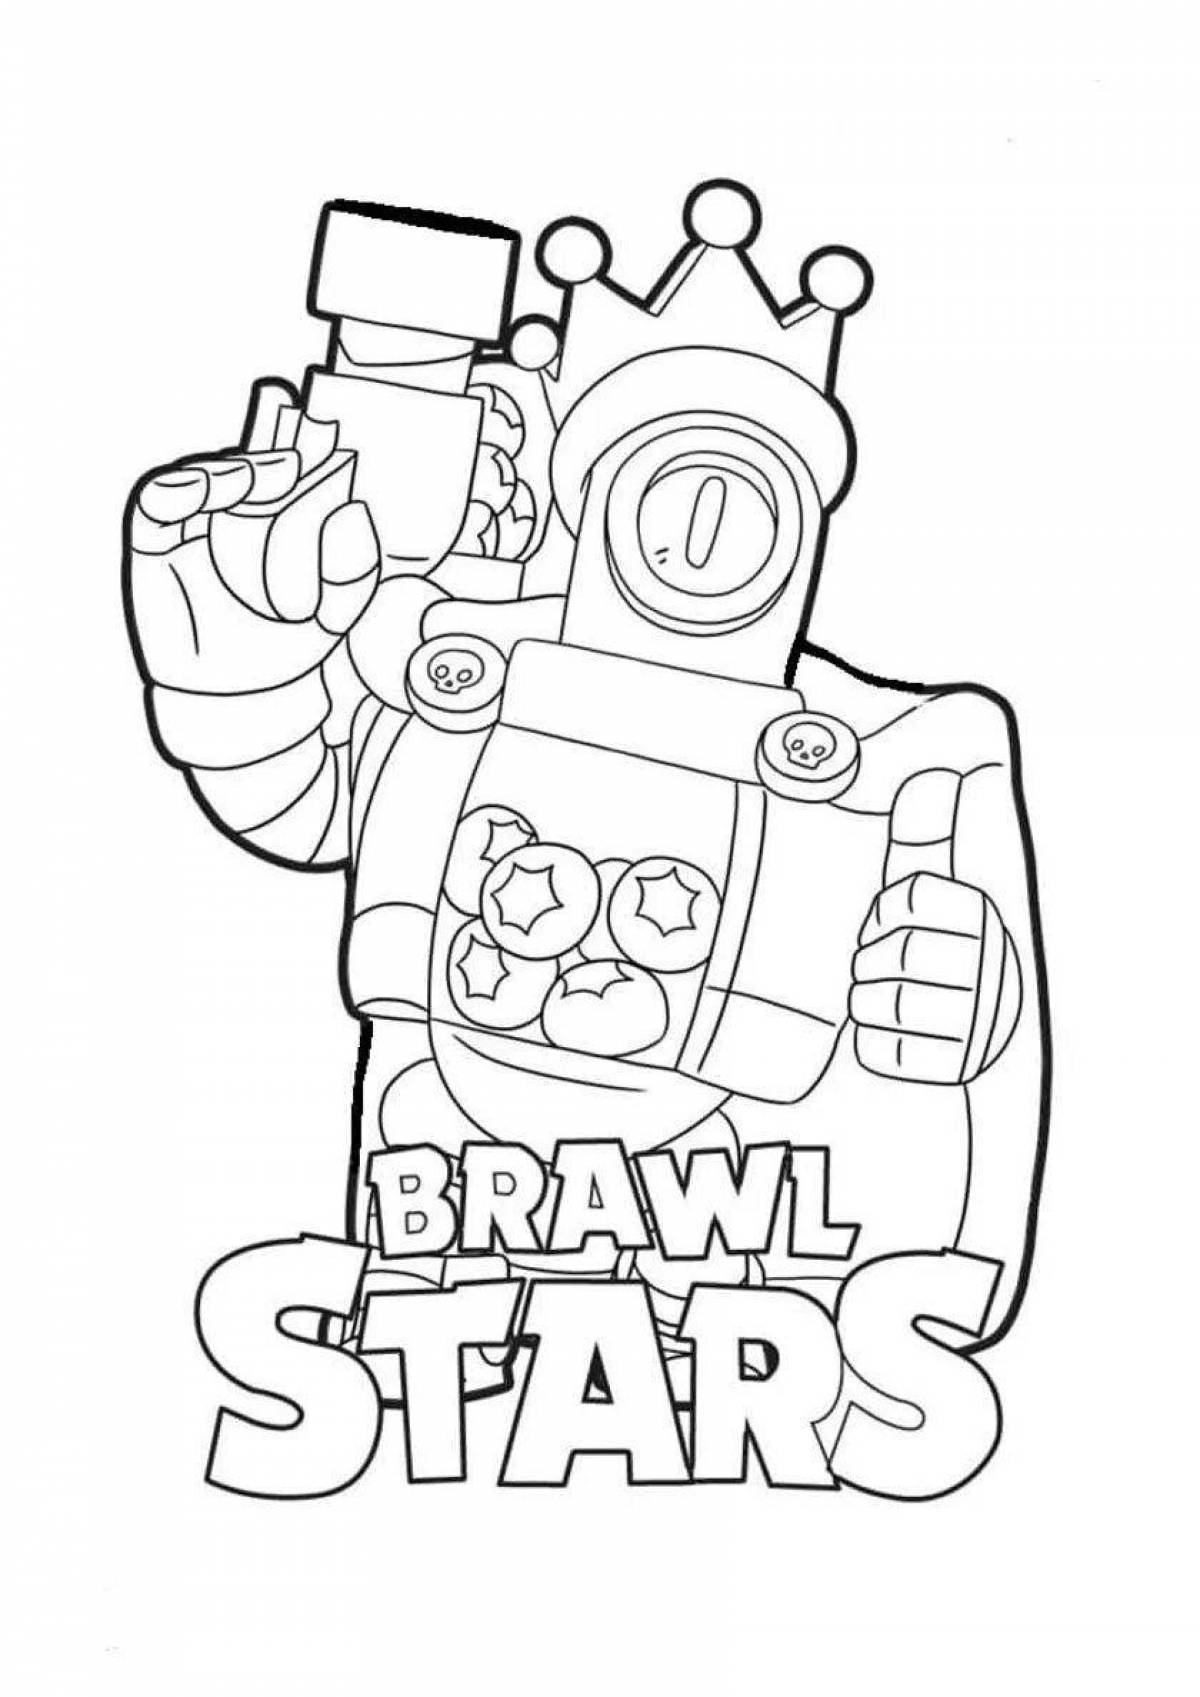 Blinking blue star coloring page